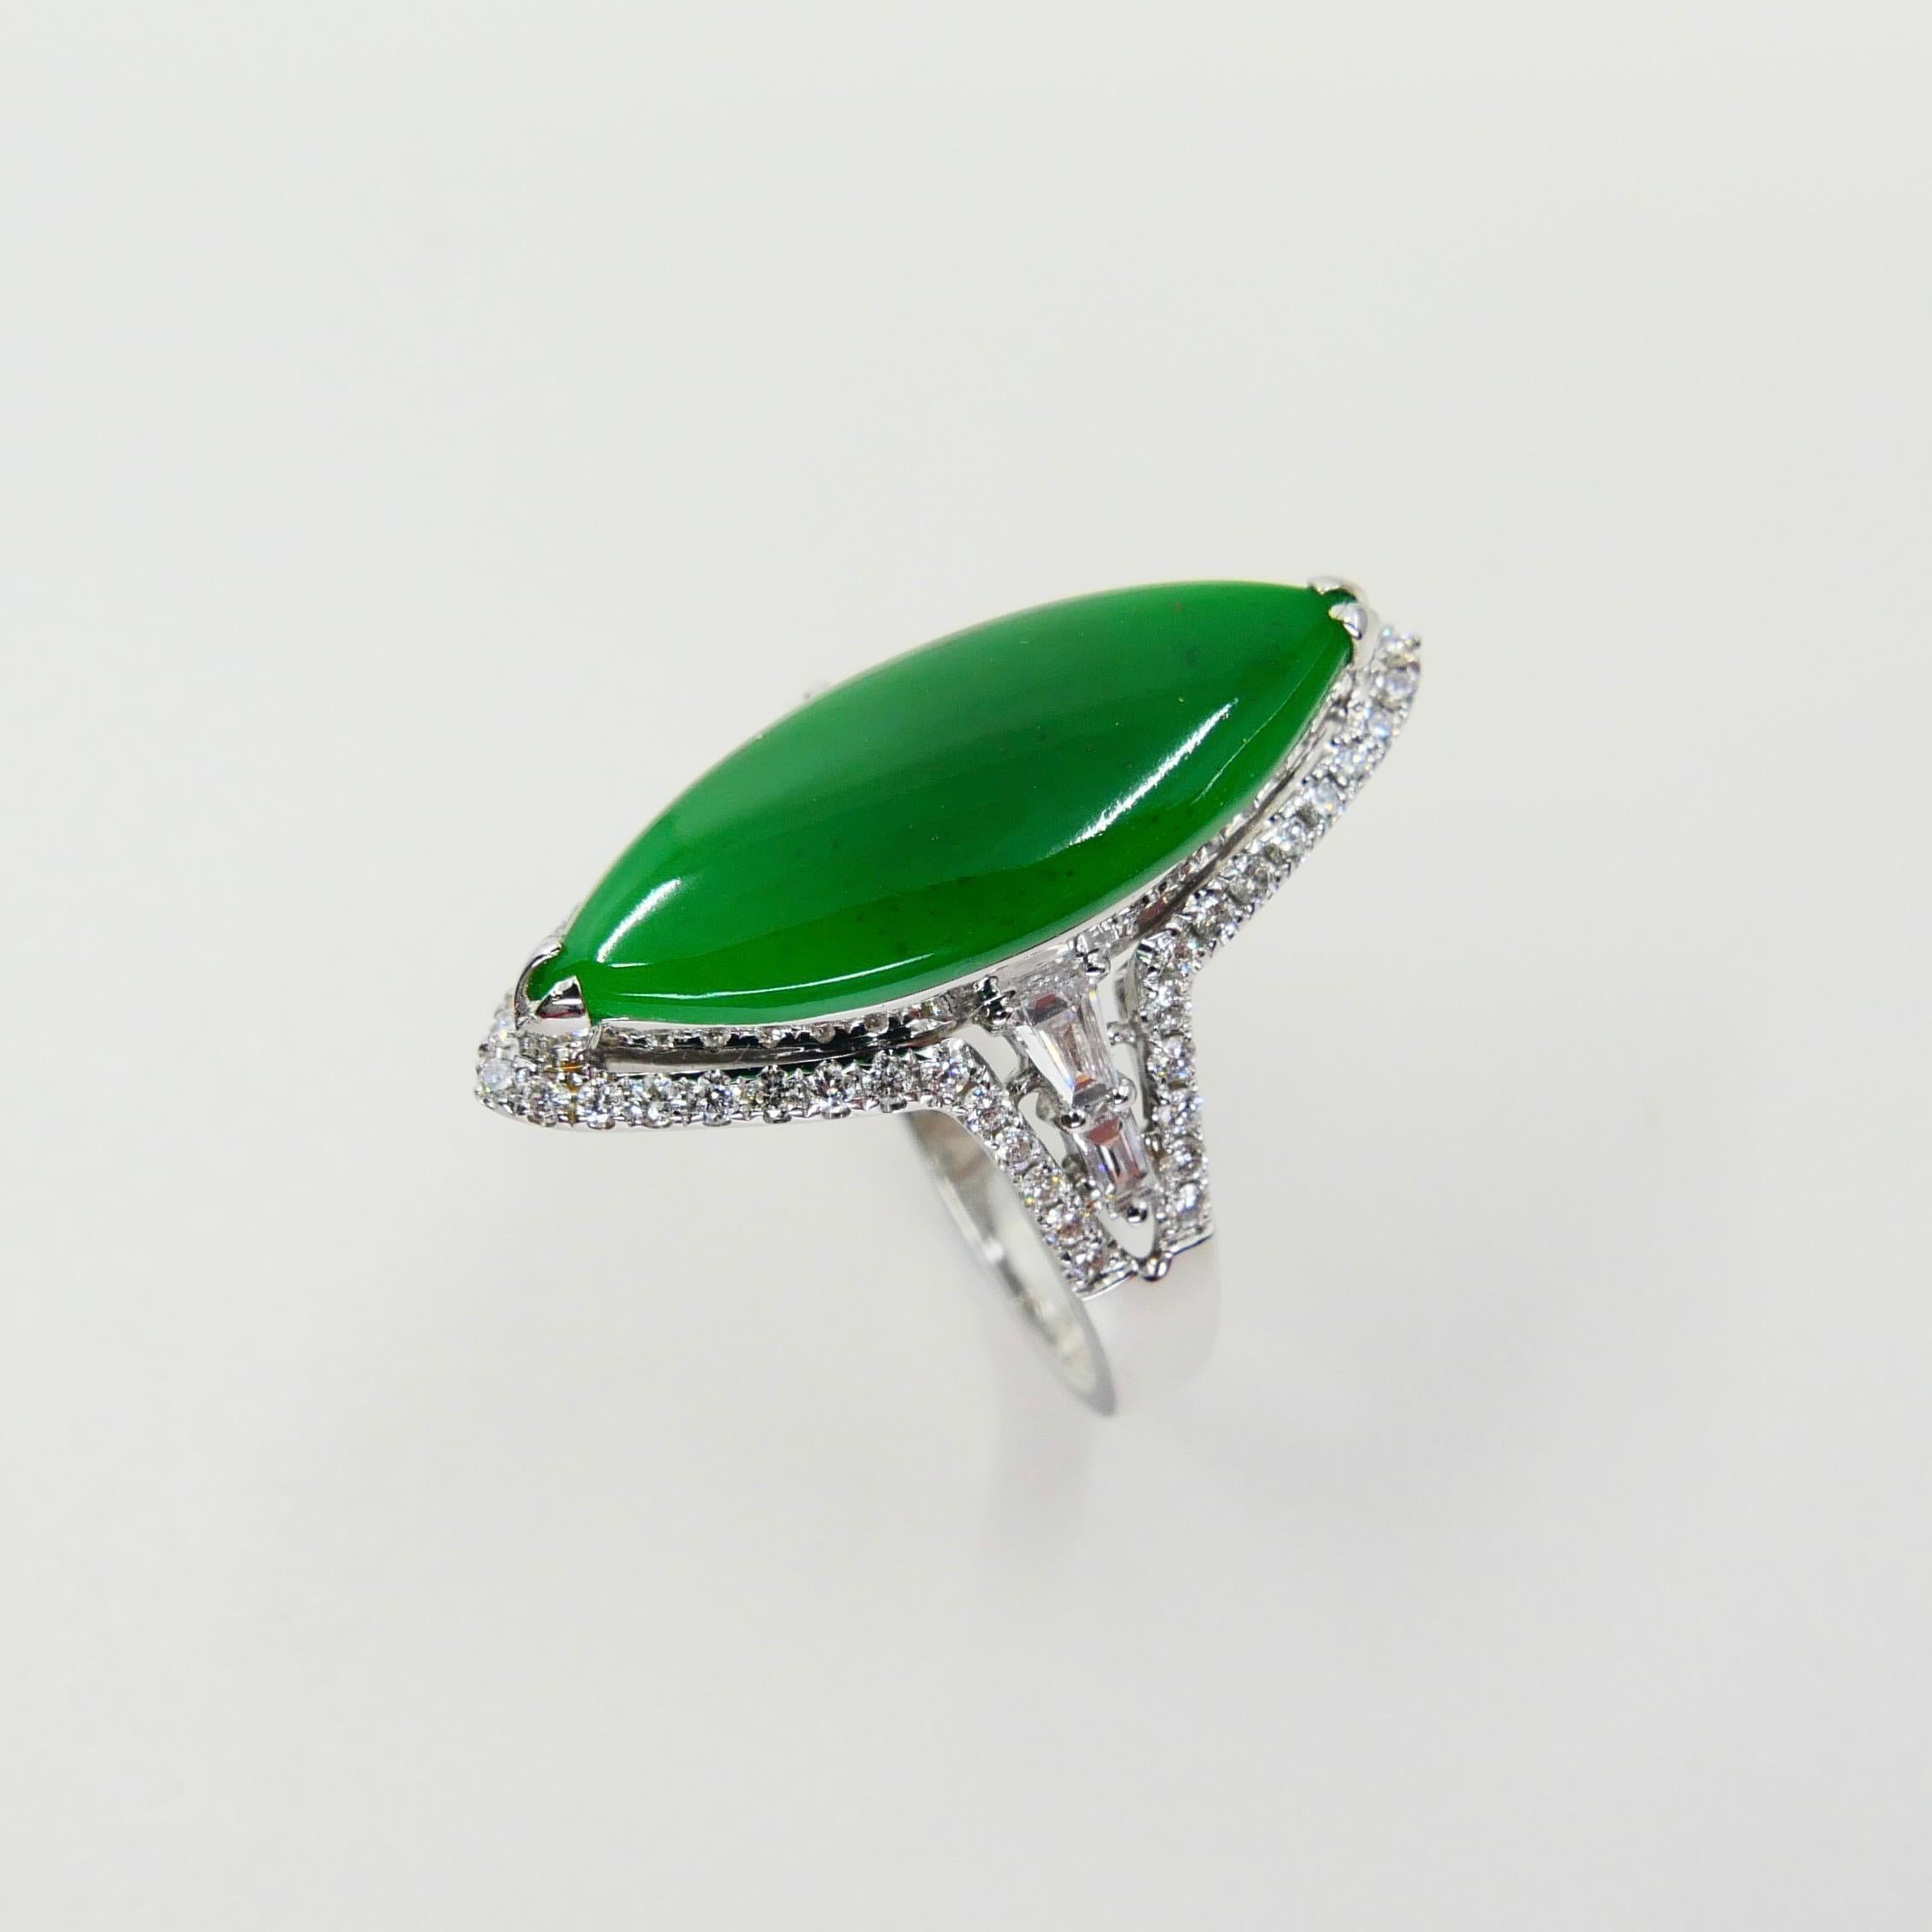 Certified Jadeite Jade and Diamond Cocktail Ring, Intense Apple Green Color For Sale 4